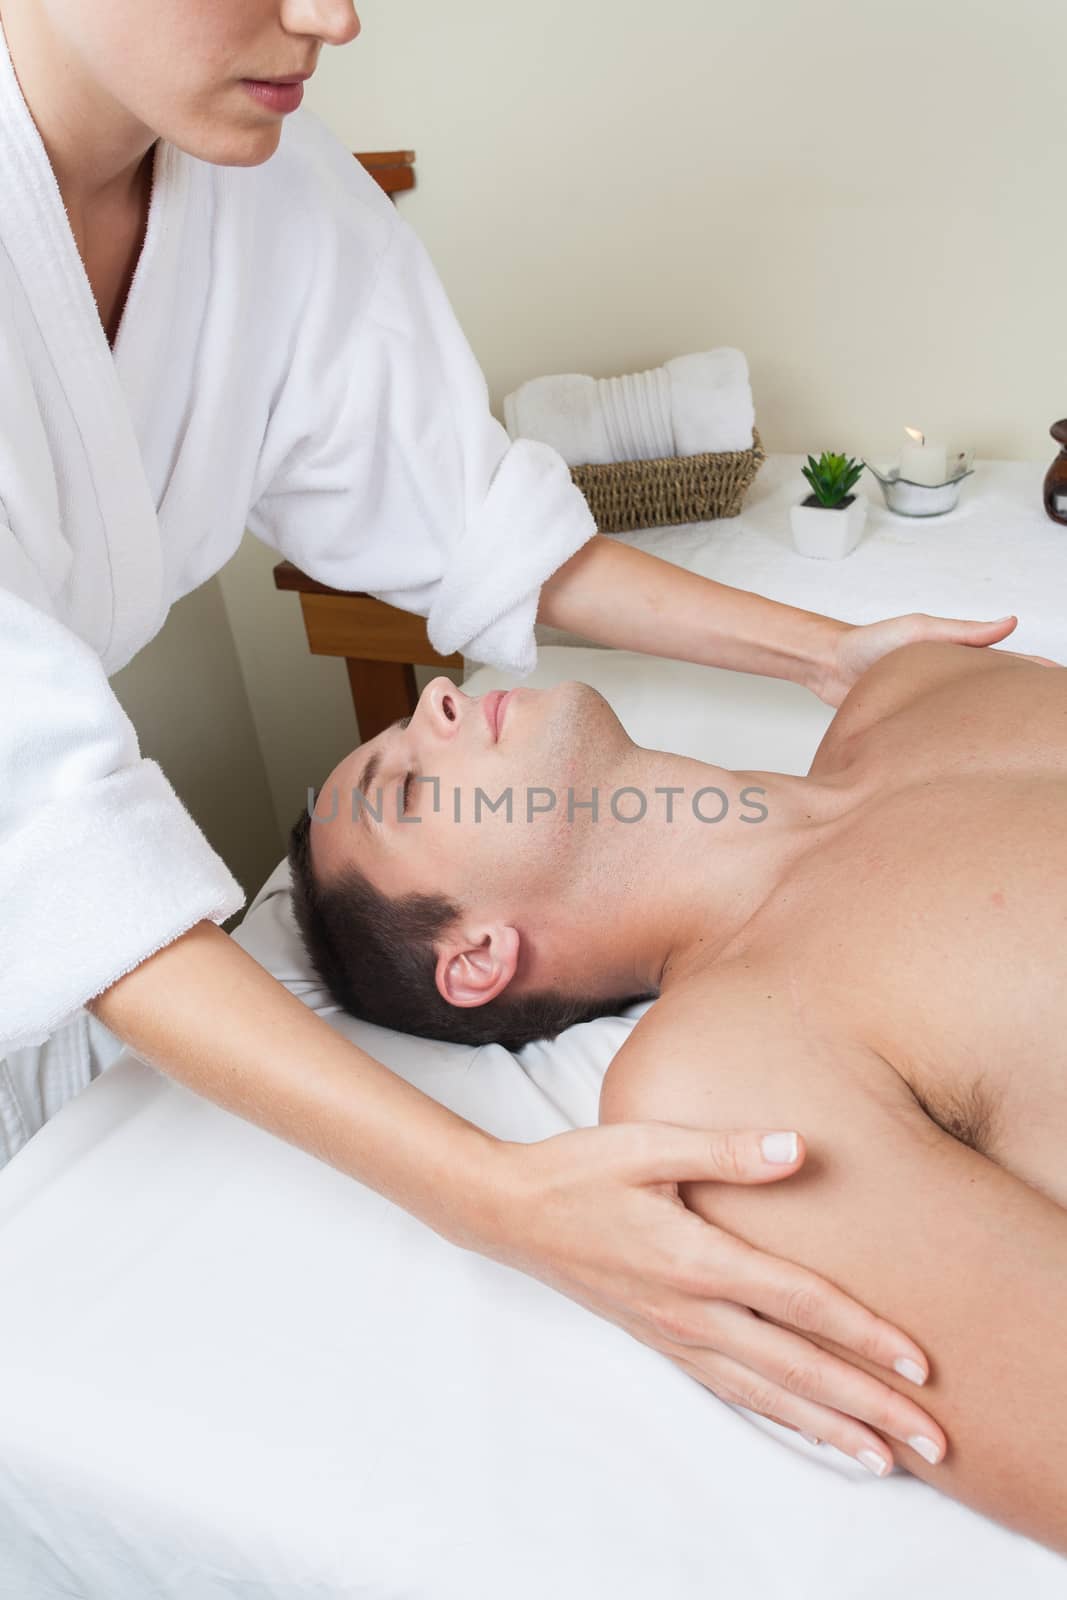 Guy laid receiving massage by ifilms